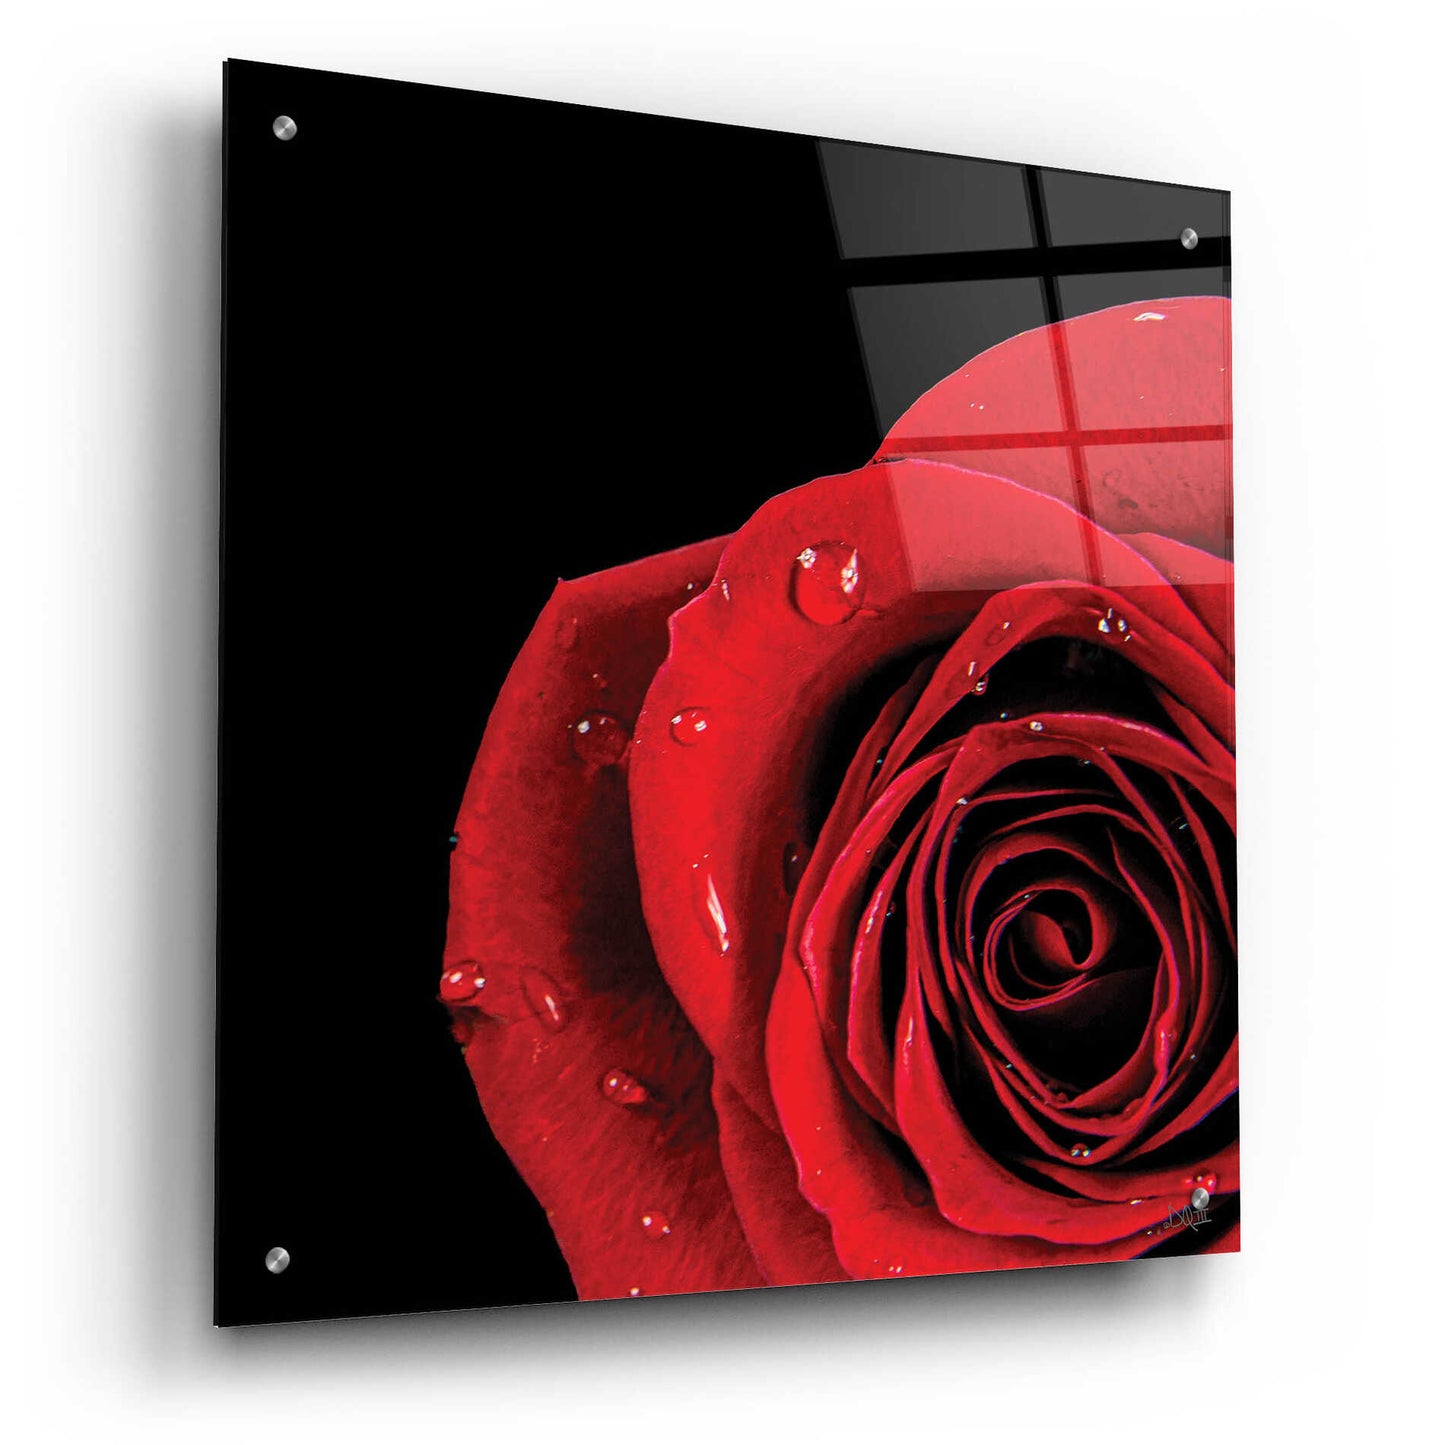 Epic Art 'Pop of Red Rose' by Donnie Quillen, Acrylic Glass Wall Art,24x24